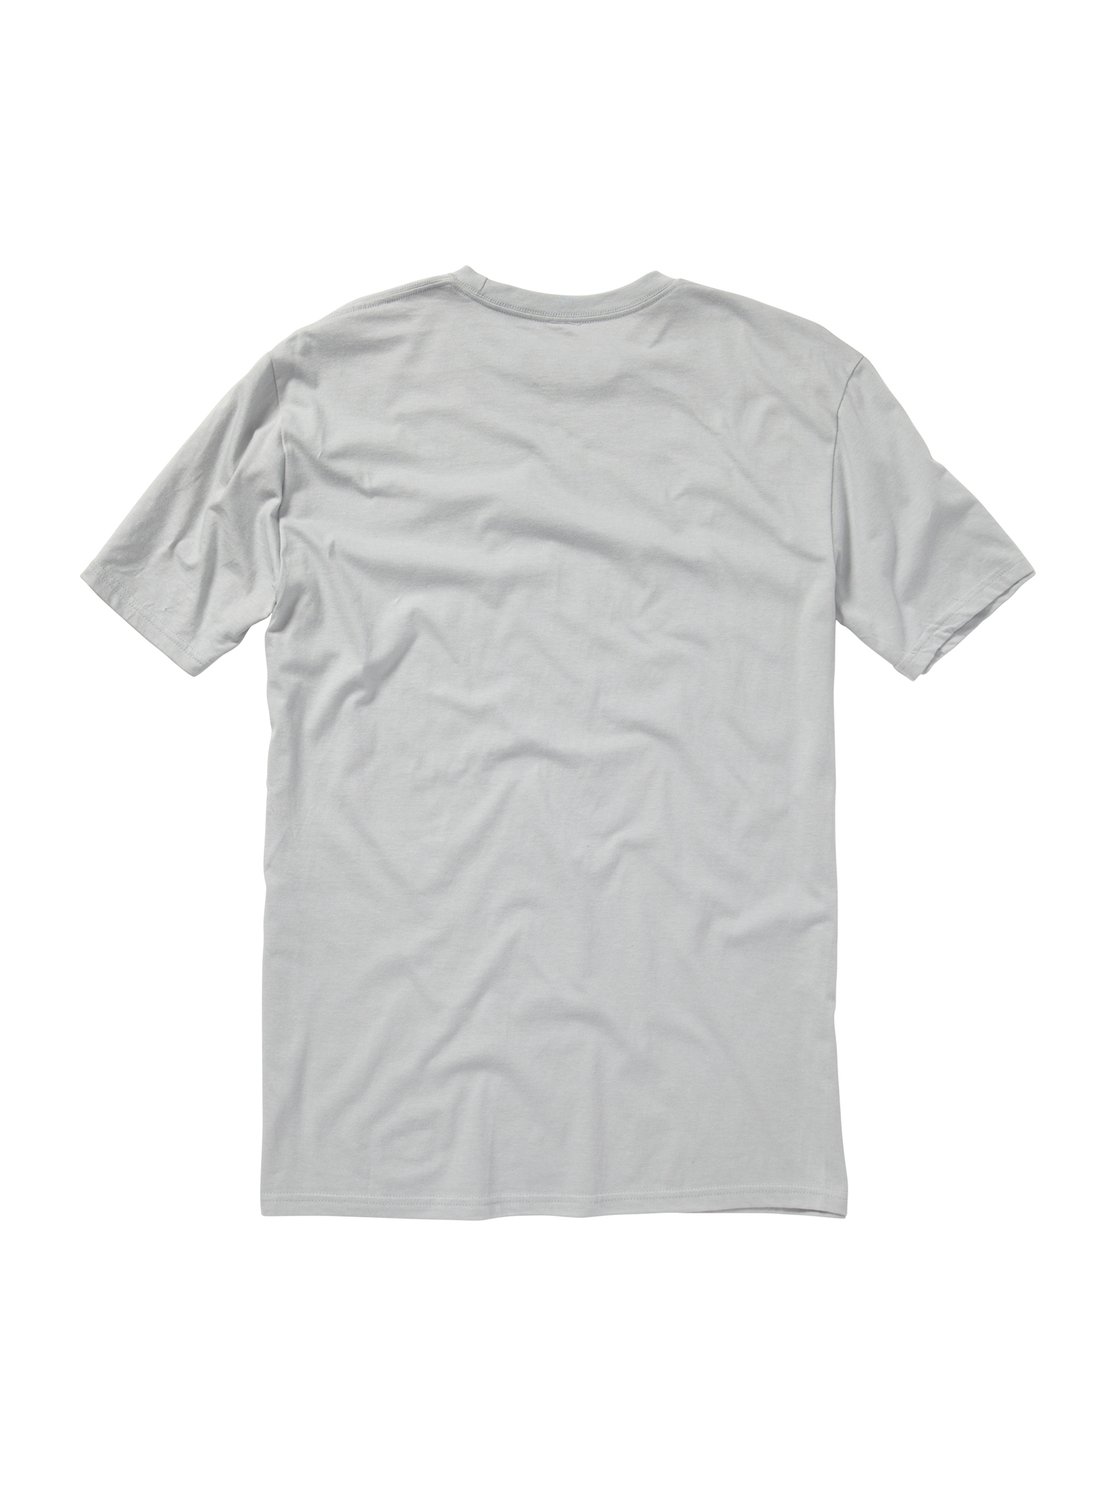 Everday Solid Slim Fit T-Shirt AQYZT01121 | Quiksilver